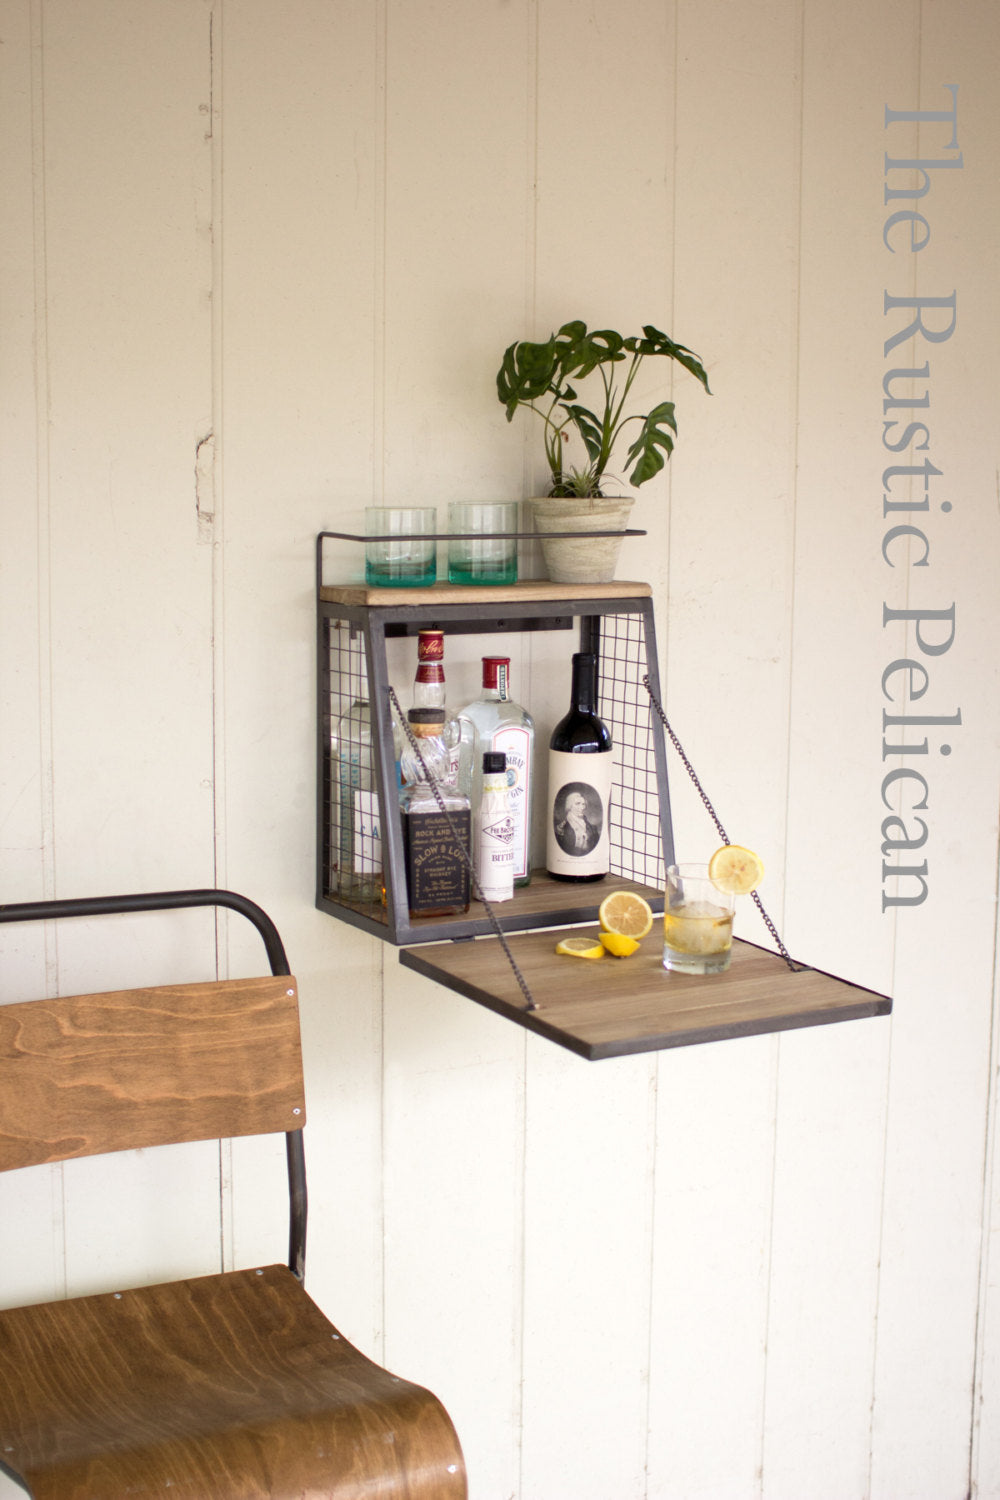 Industrial Shelving - Free Shipping - The Rustic Pelican